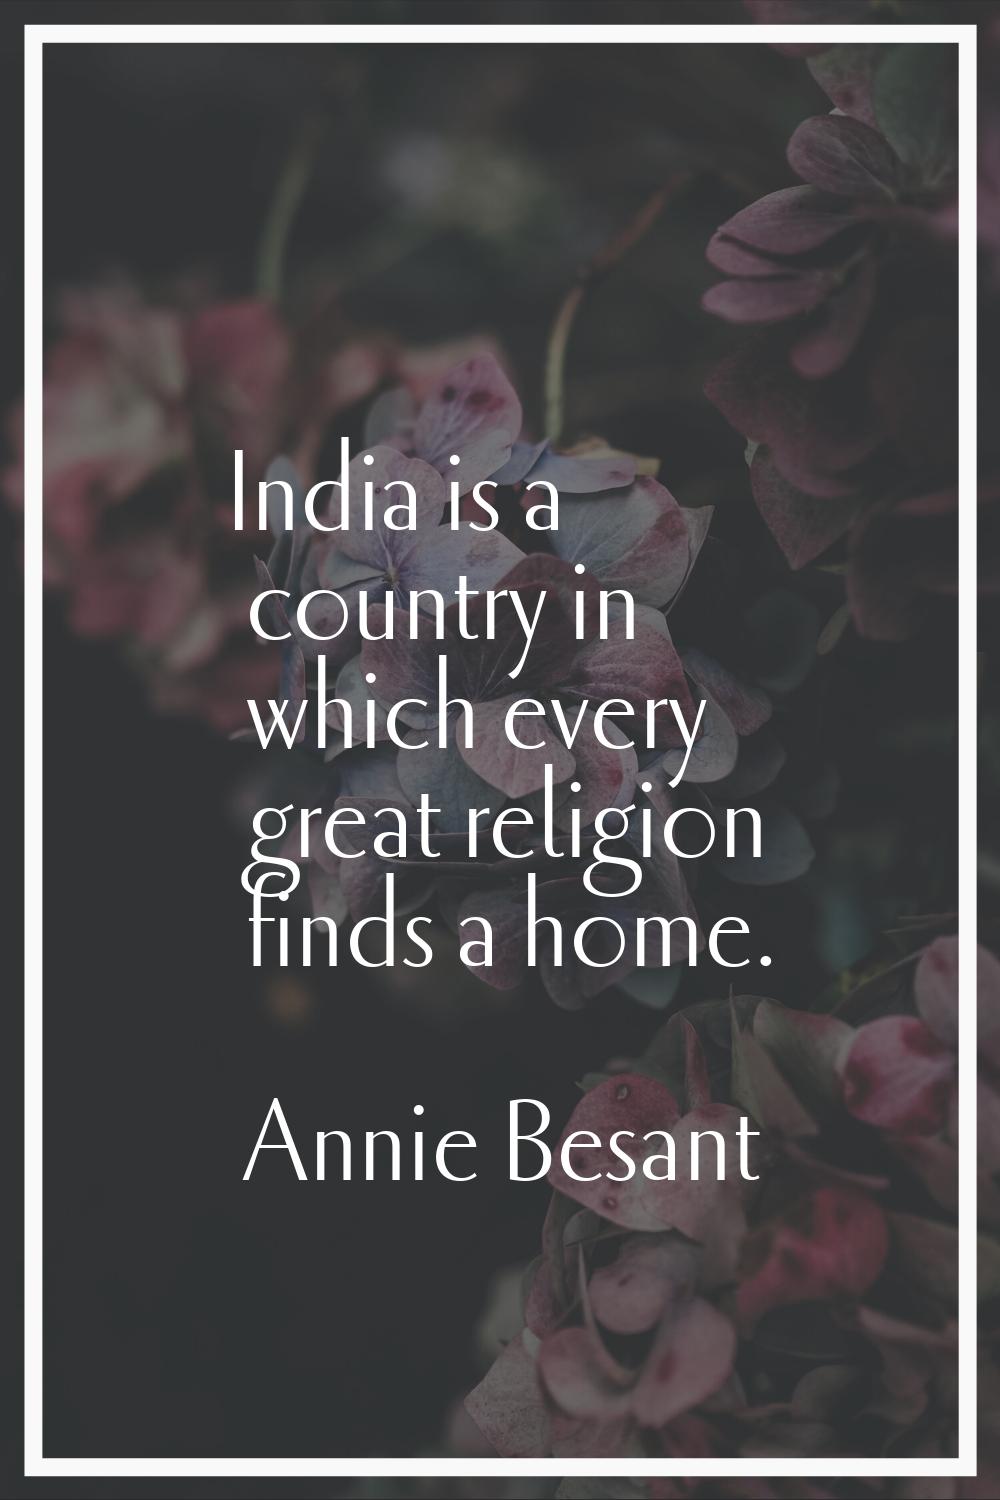 India is a country in which every great religion finds a home.